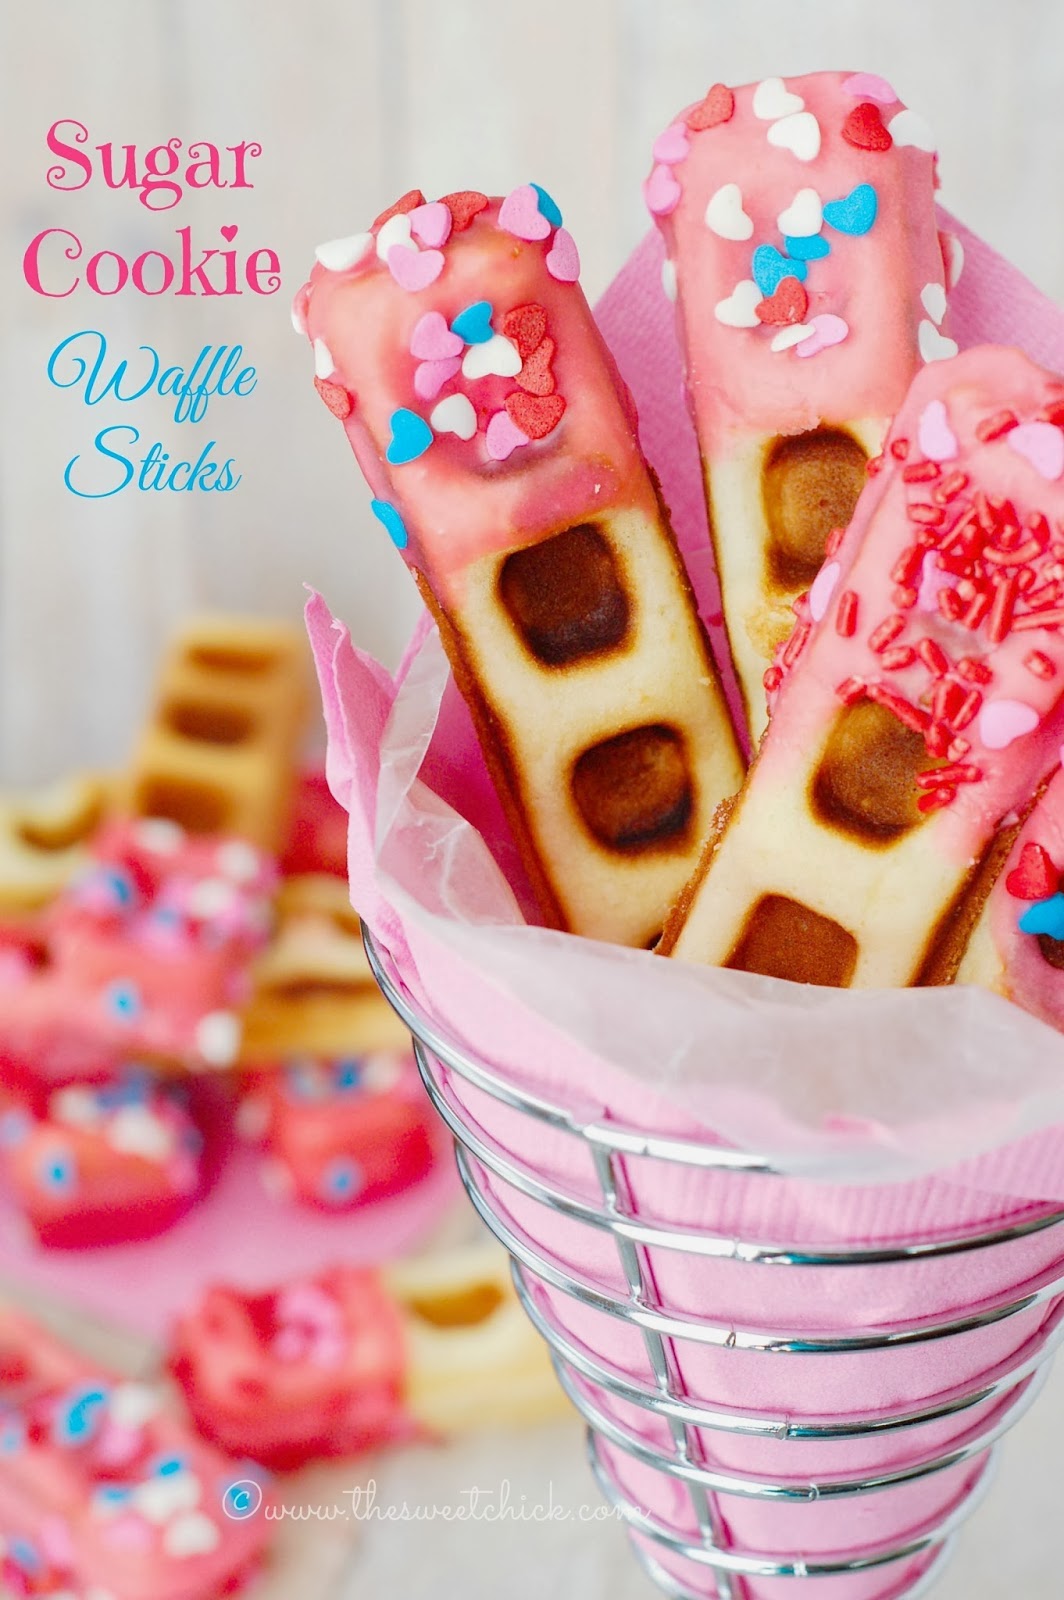 Sugar Cookie Waffle Sticks by The Sweet Chick